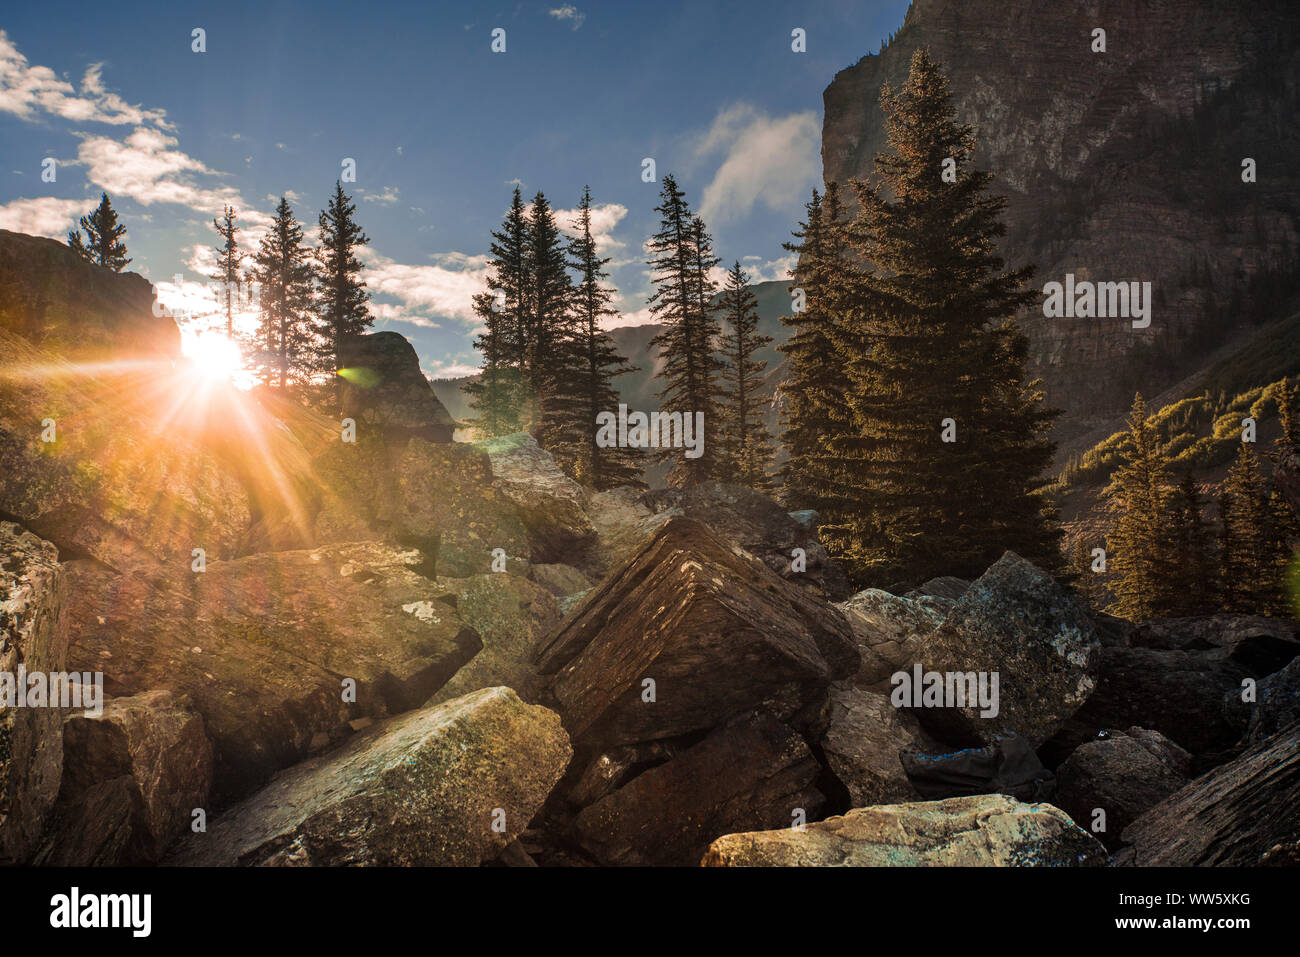 Boulders with firs in the background and sunrays, Rocky Mountains, Canada Stock Photo